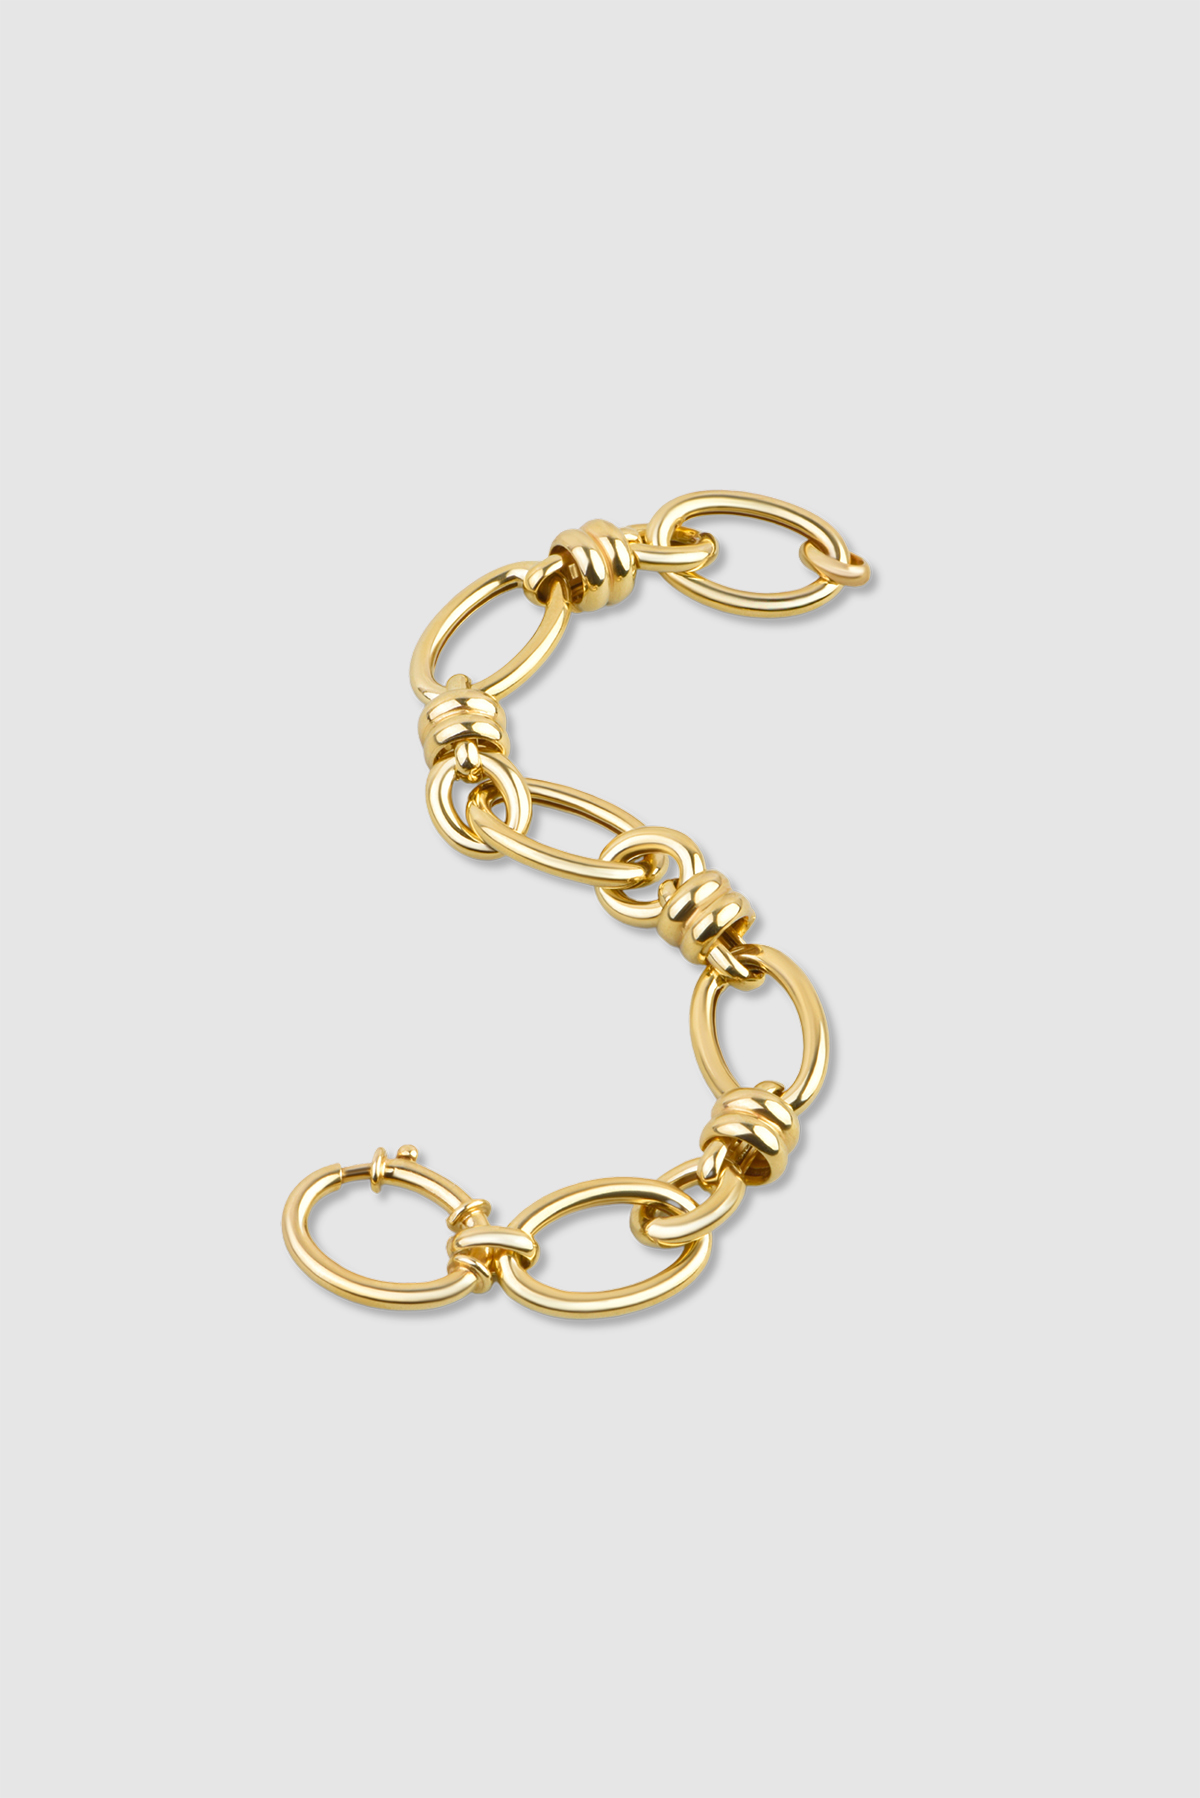 18 Karat Yellow Gold Plated 19 Cm Silver Chain Bracelet with Knot Detail